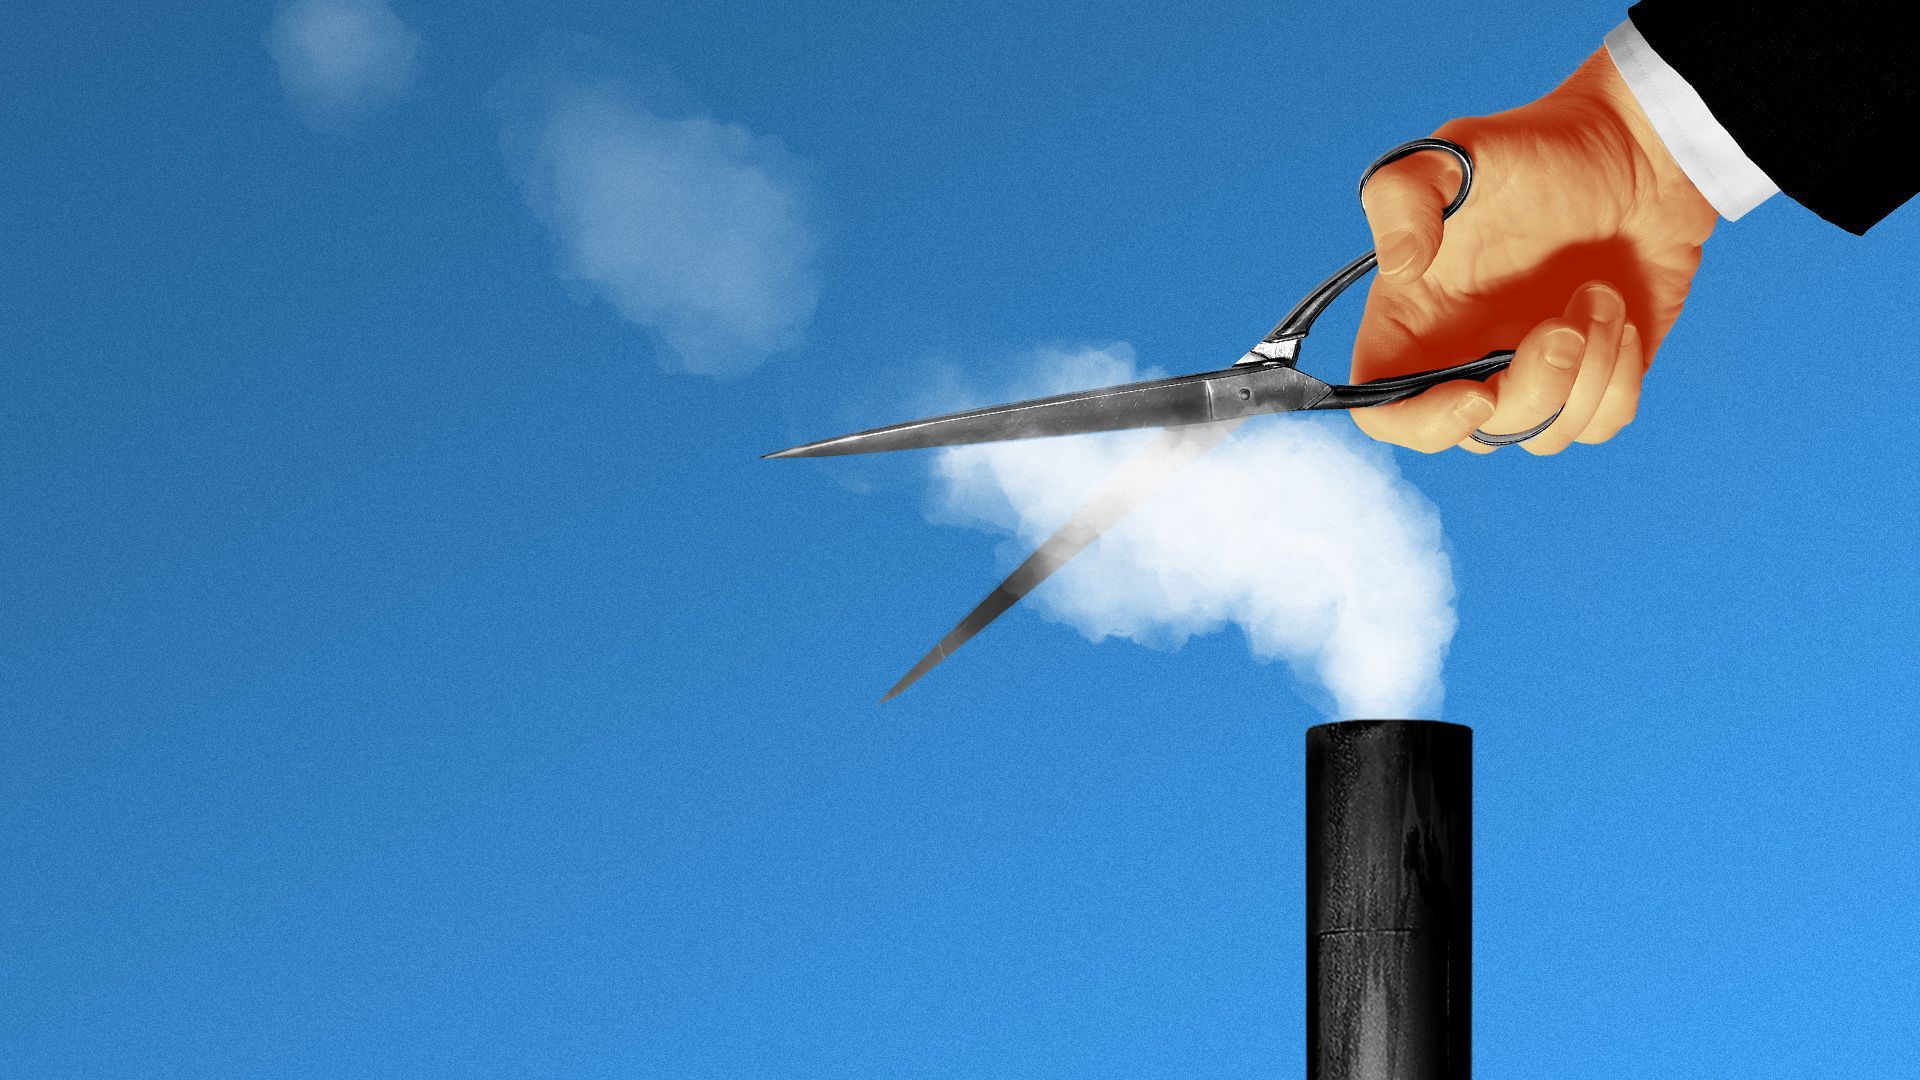 Illustration of someone cutting emissions with scissors.